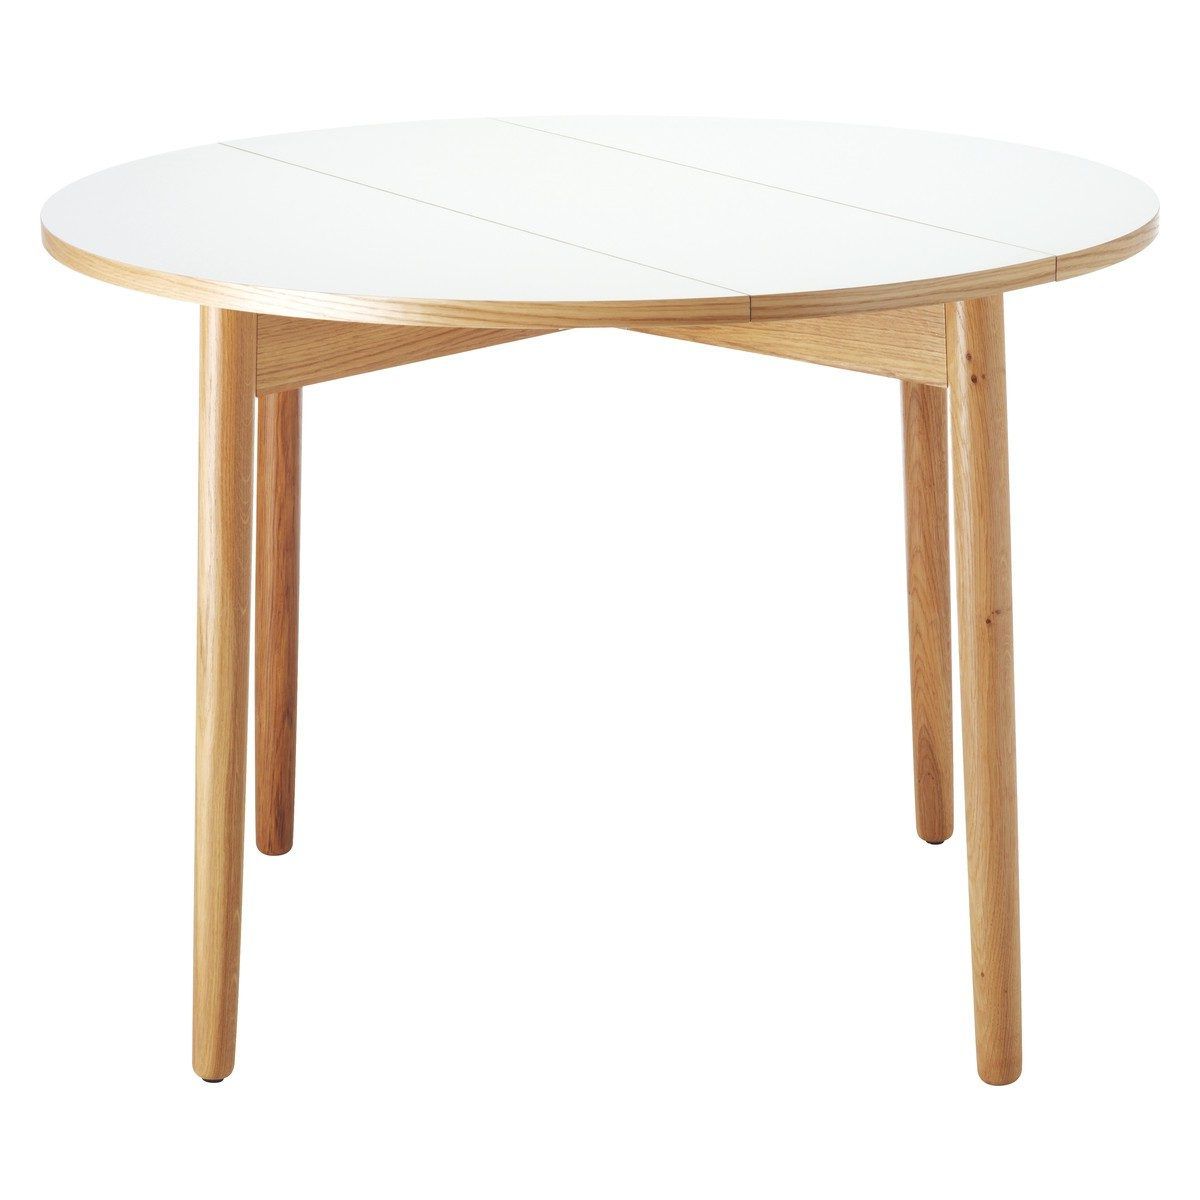 Famous Small Round Dining Table Set In Sturdy Small Round Table Within Small Round Dining Tables With Reclaimed Wood (View 13 of 30)